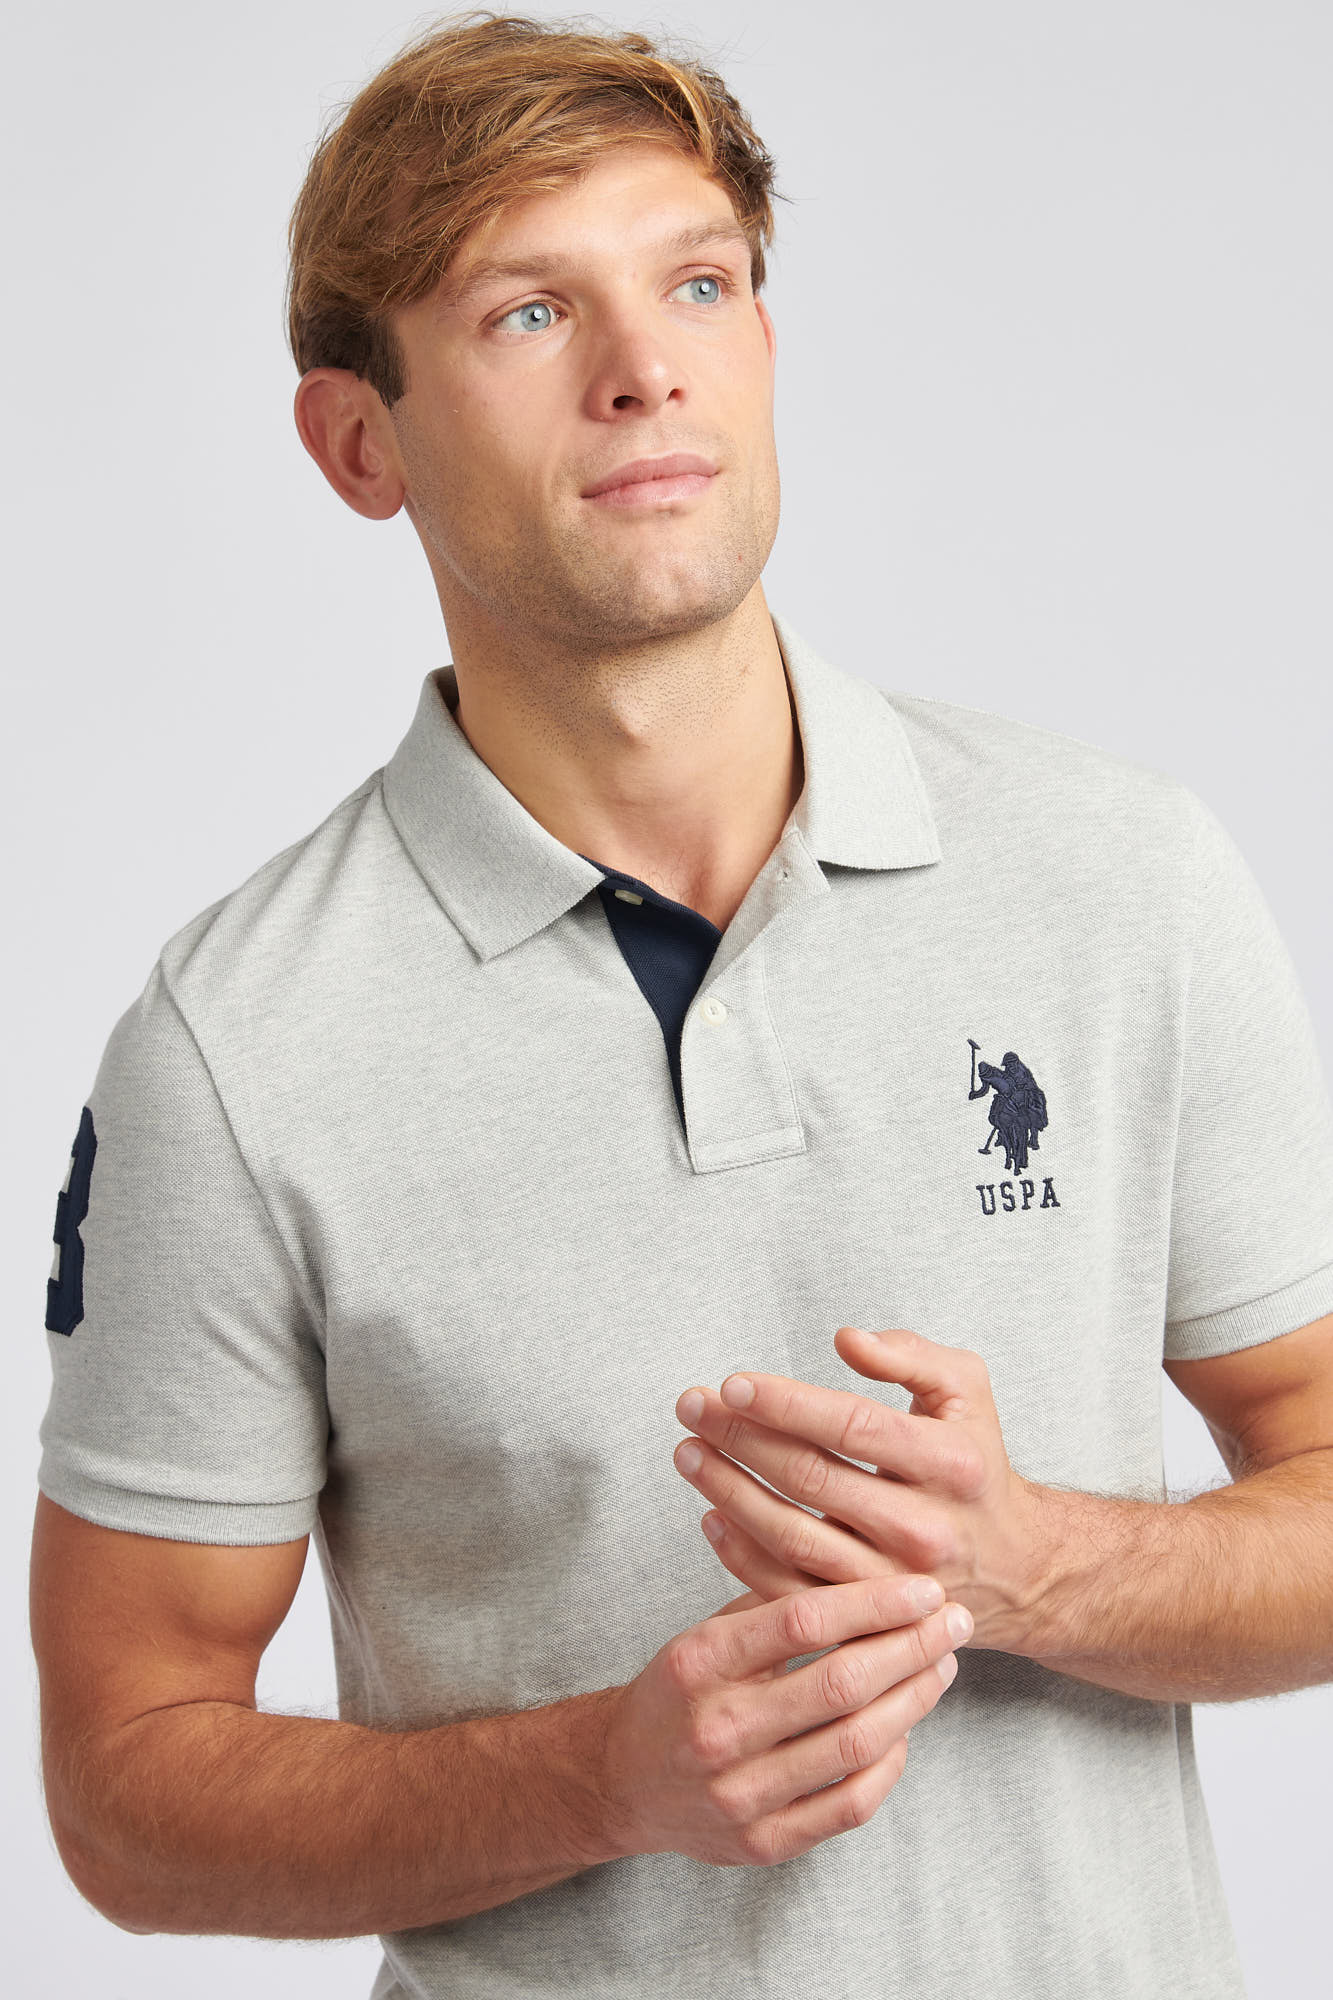 Mens Player 3 Pique Polo Shirt in Mid Grey Marl